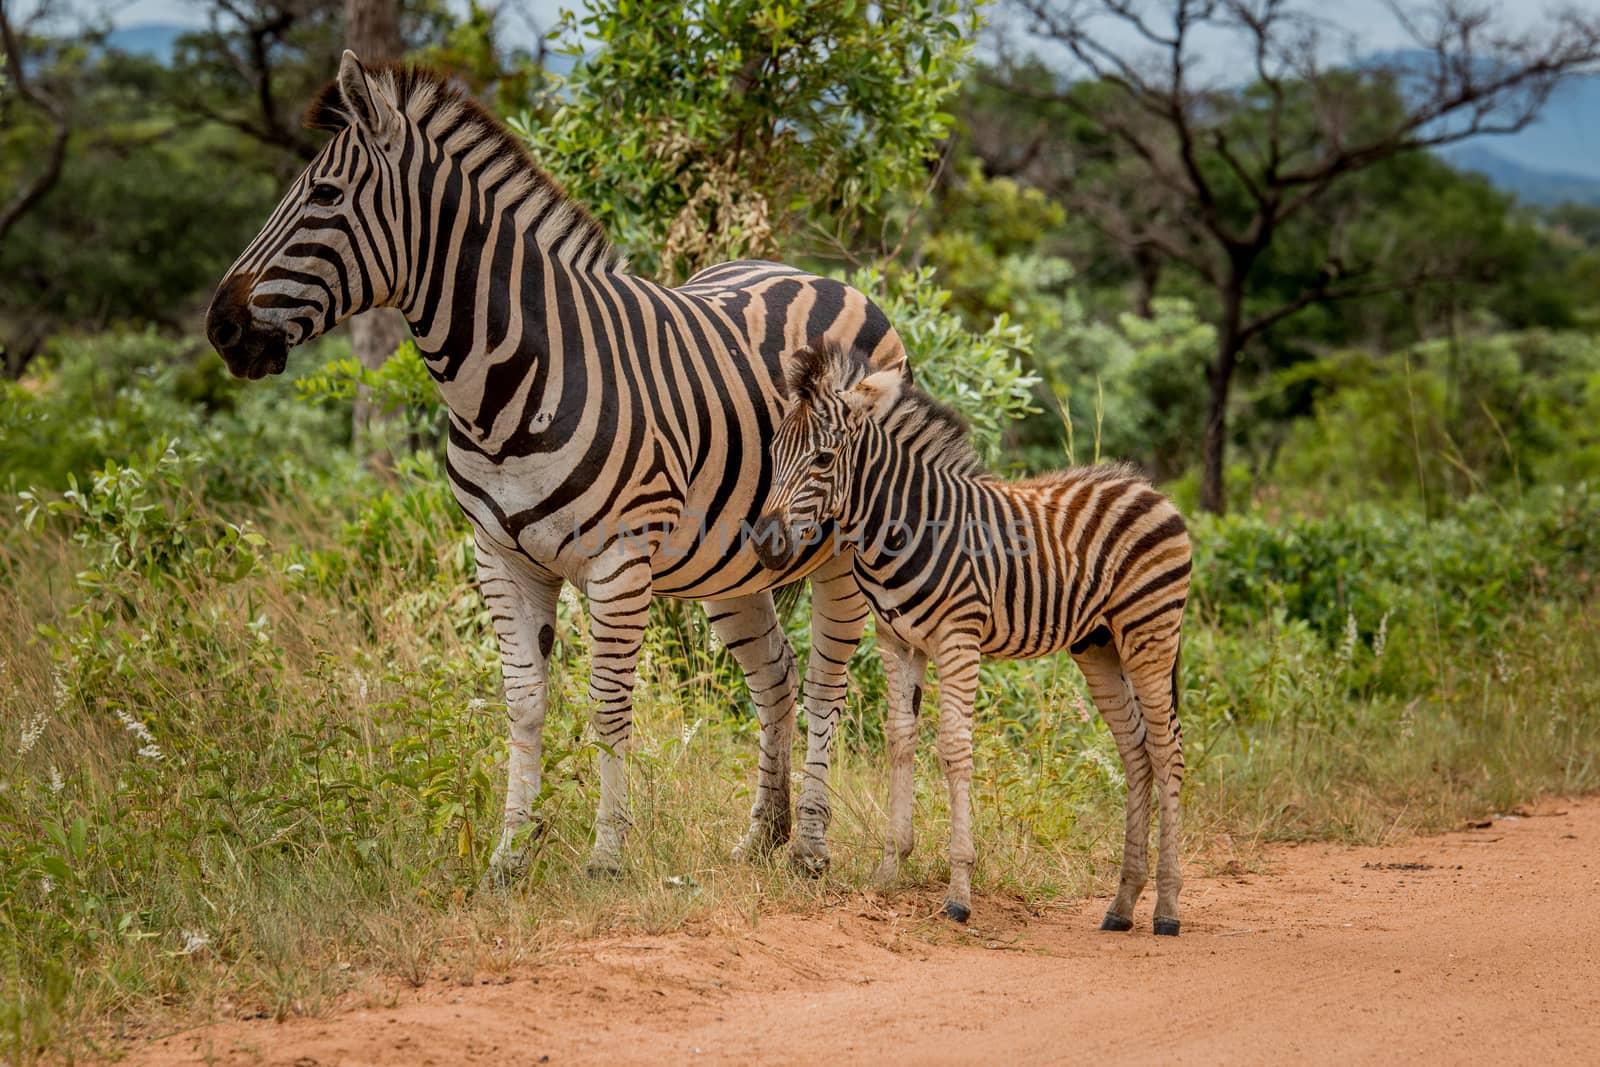 Zebra with a baby in the Kruger National Park, South Africa.